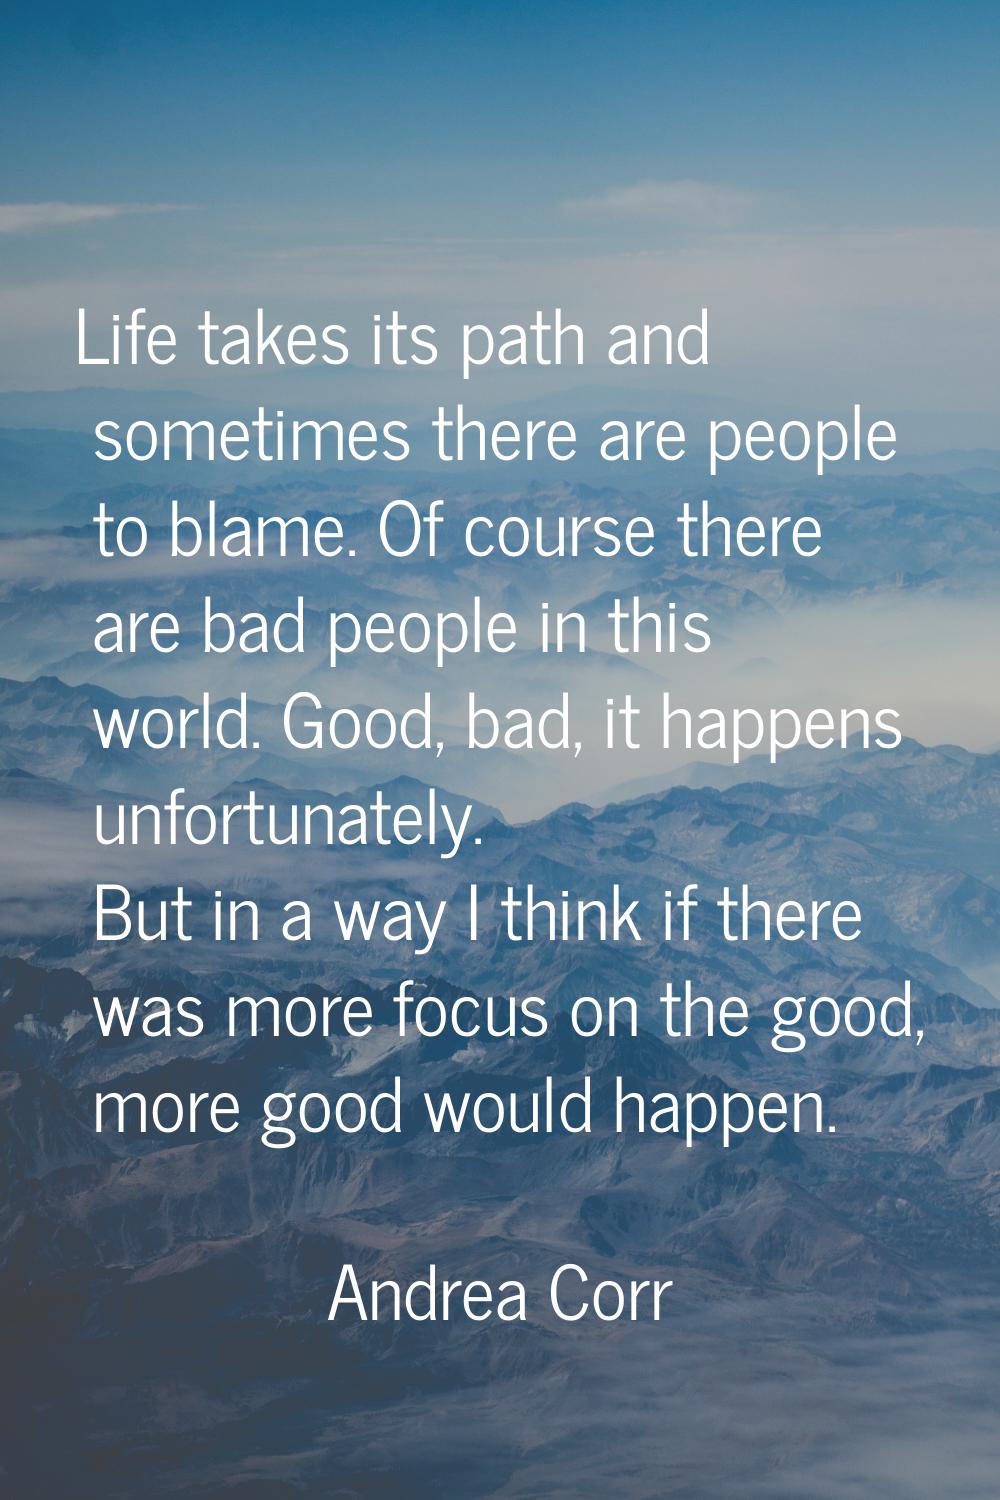 Life takes its path and sometimes there are people to blame. Of course there are bad people in this